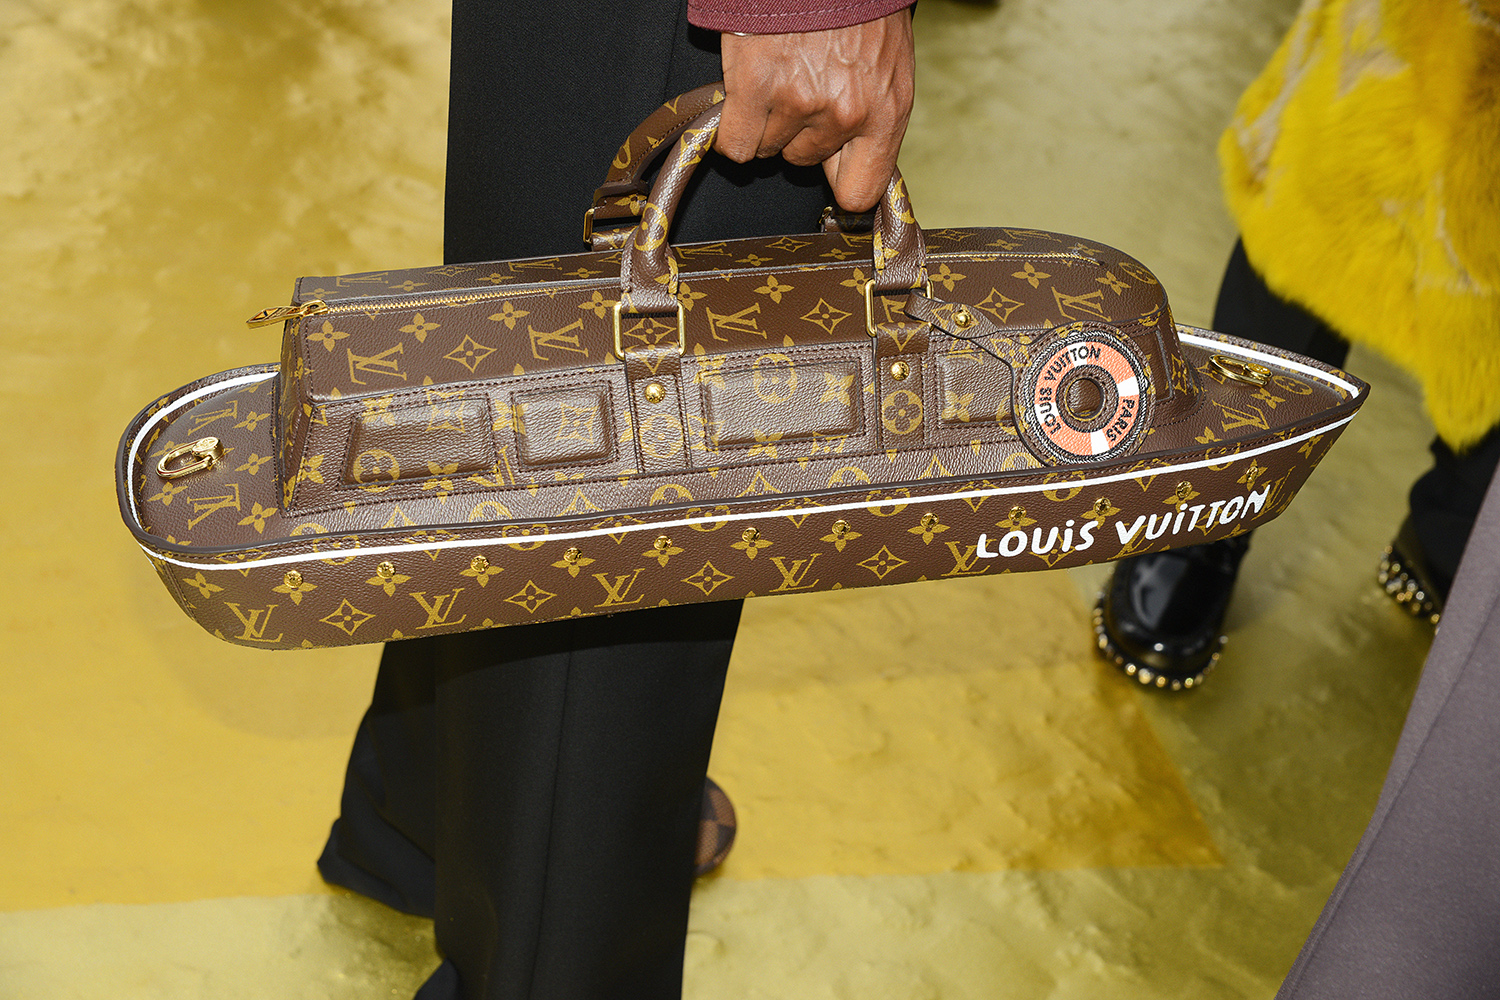 Backstage details of the latest LV show. That LV vinyl stand is